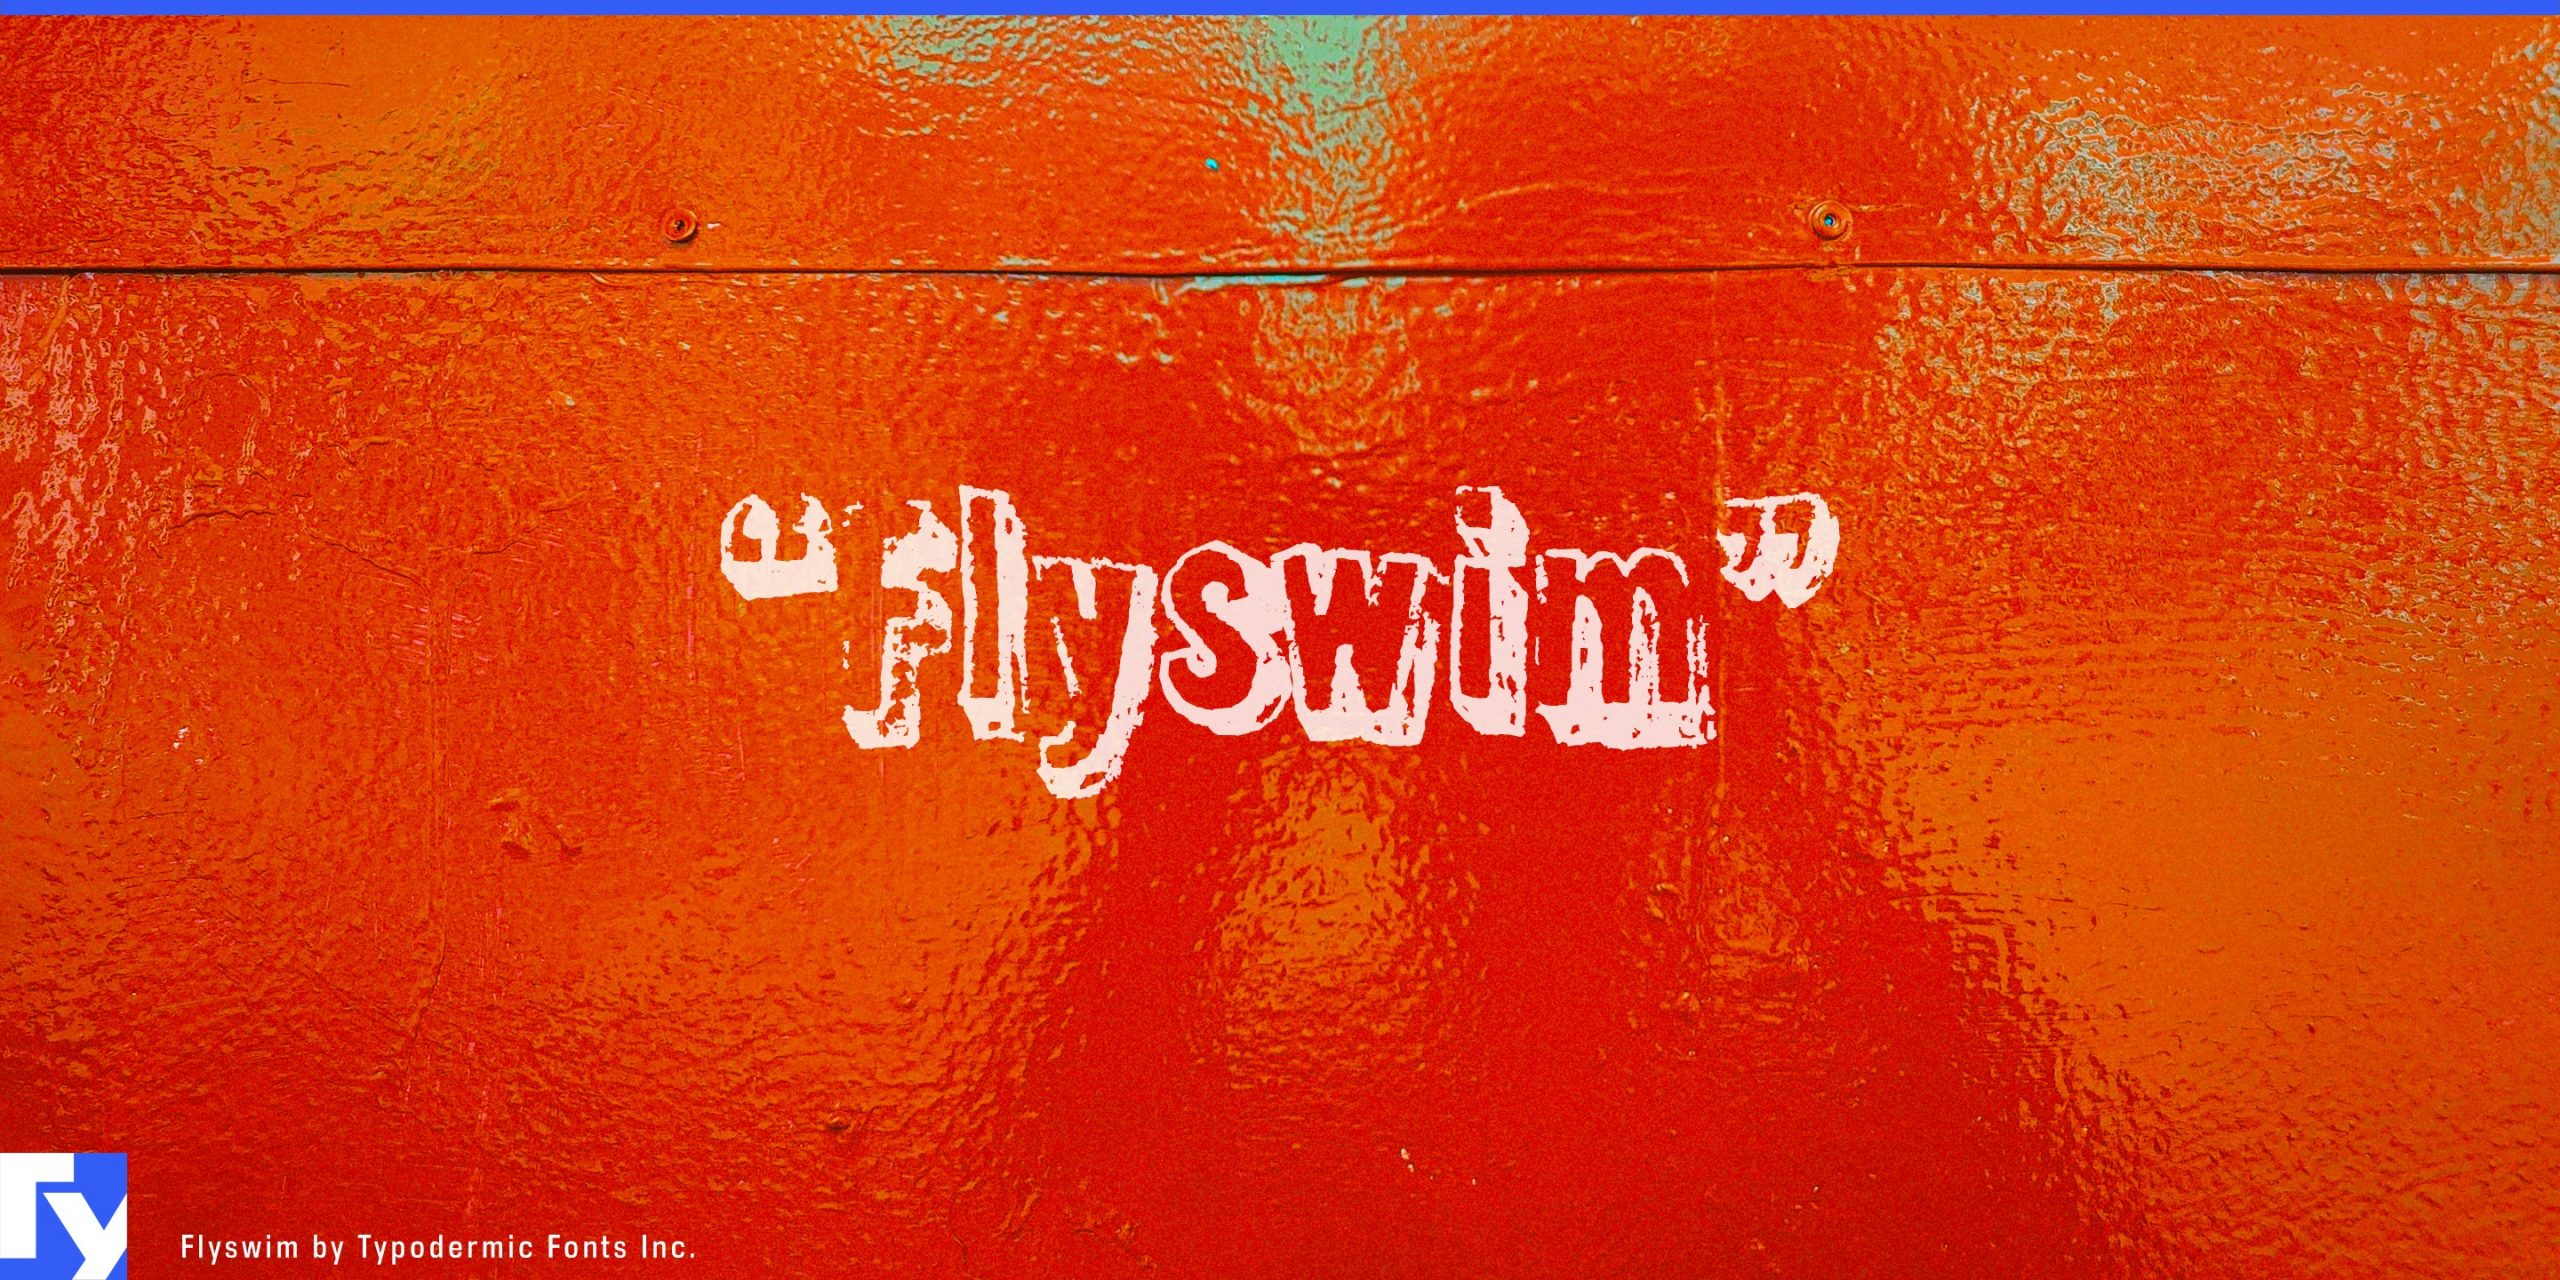 Rough and Ready: Flyswim Typeface in Action